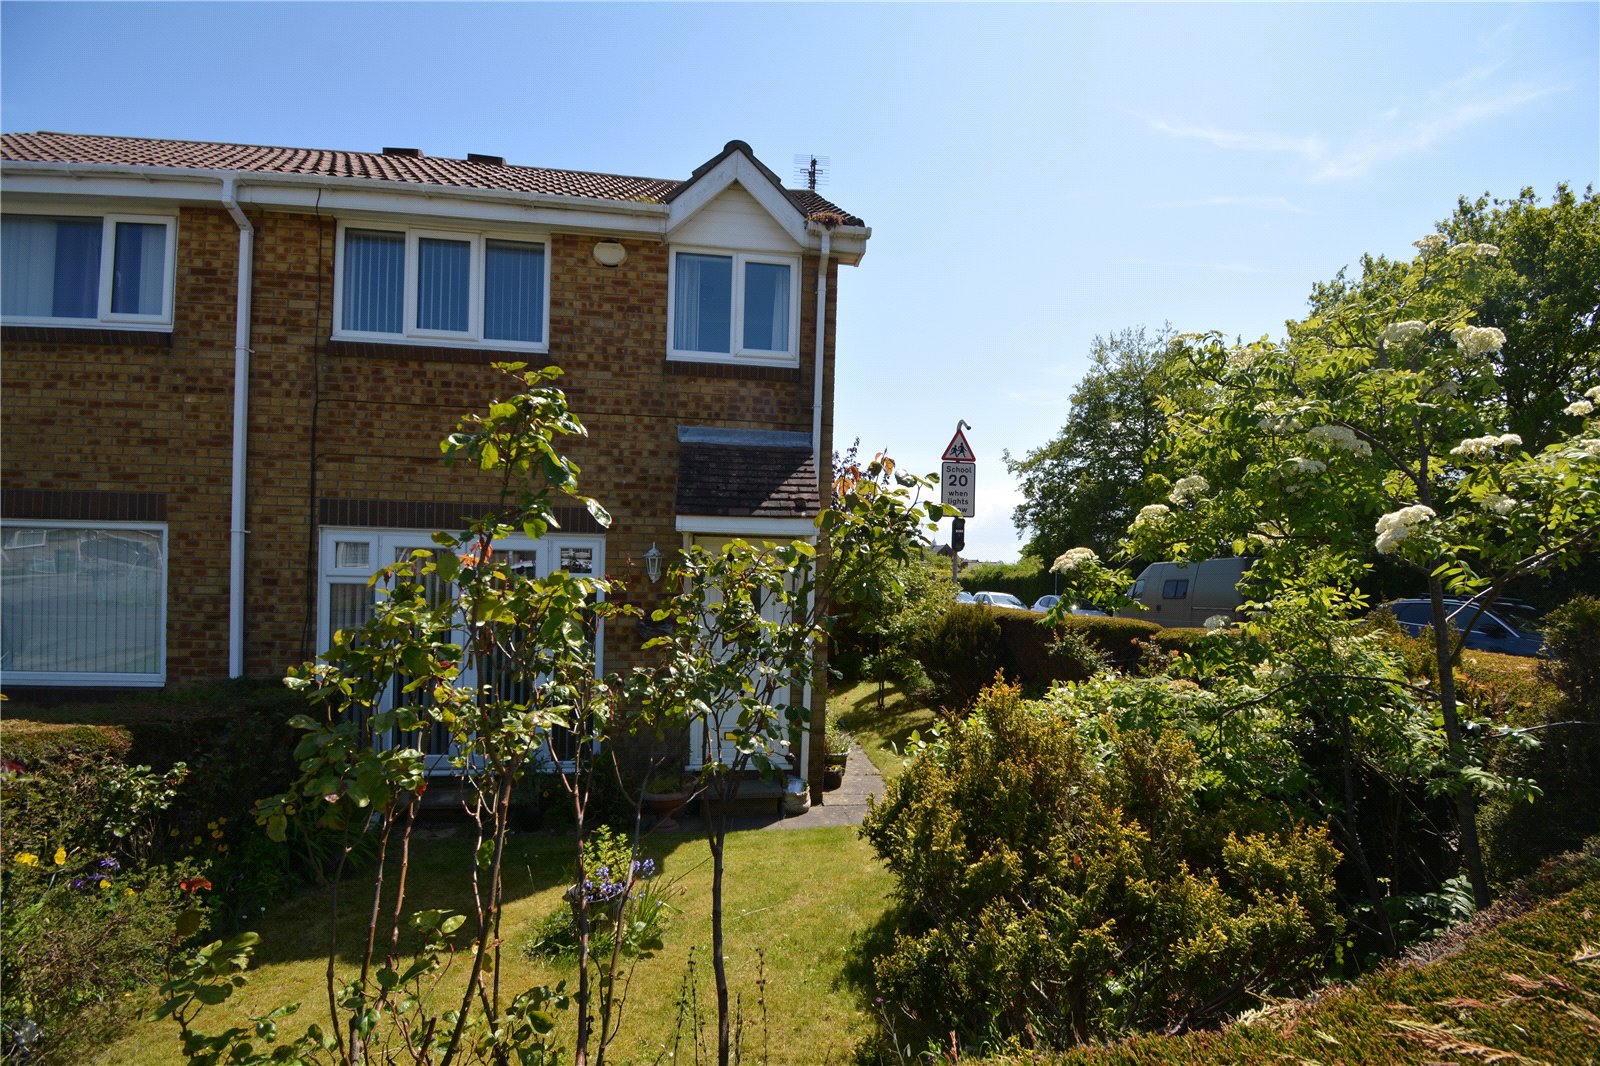 3 bed house for sale in Pinfold Way South, Bridlington - Property Image 1